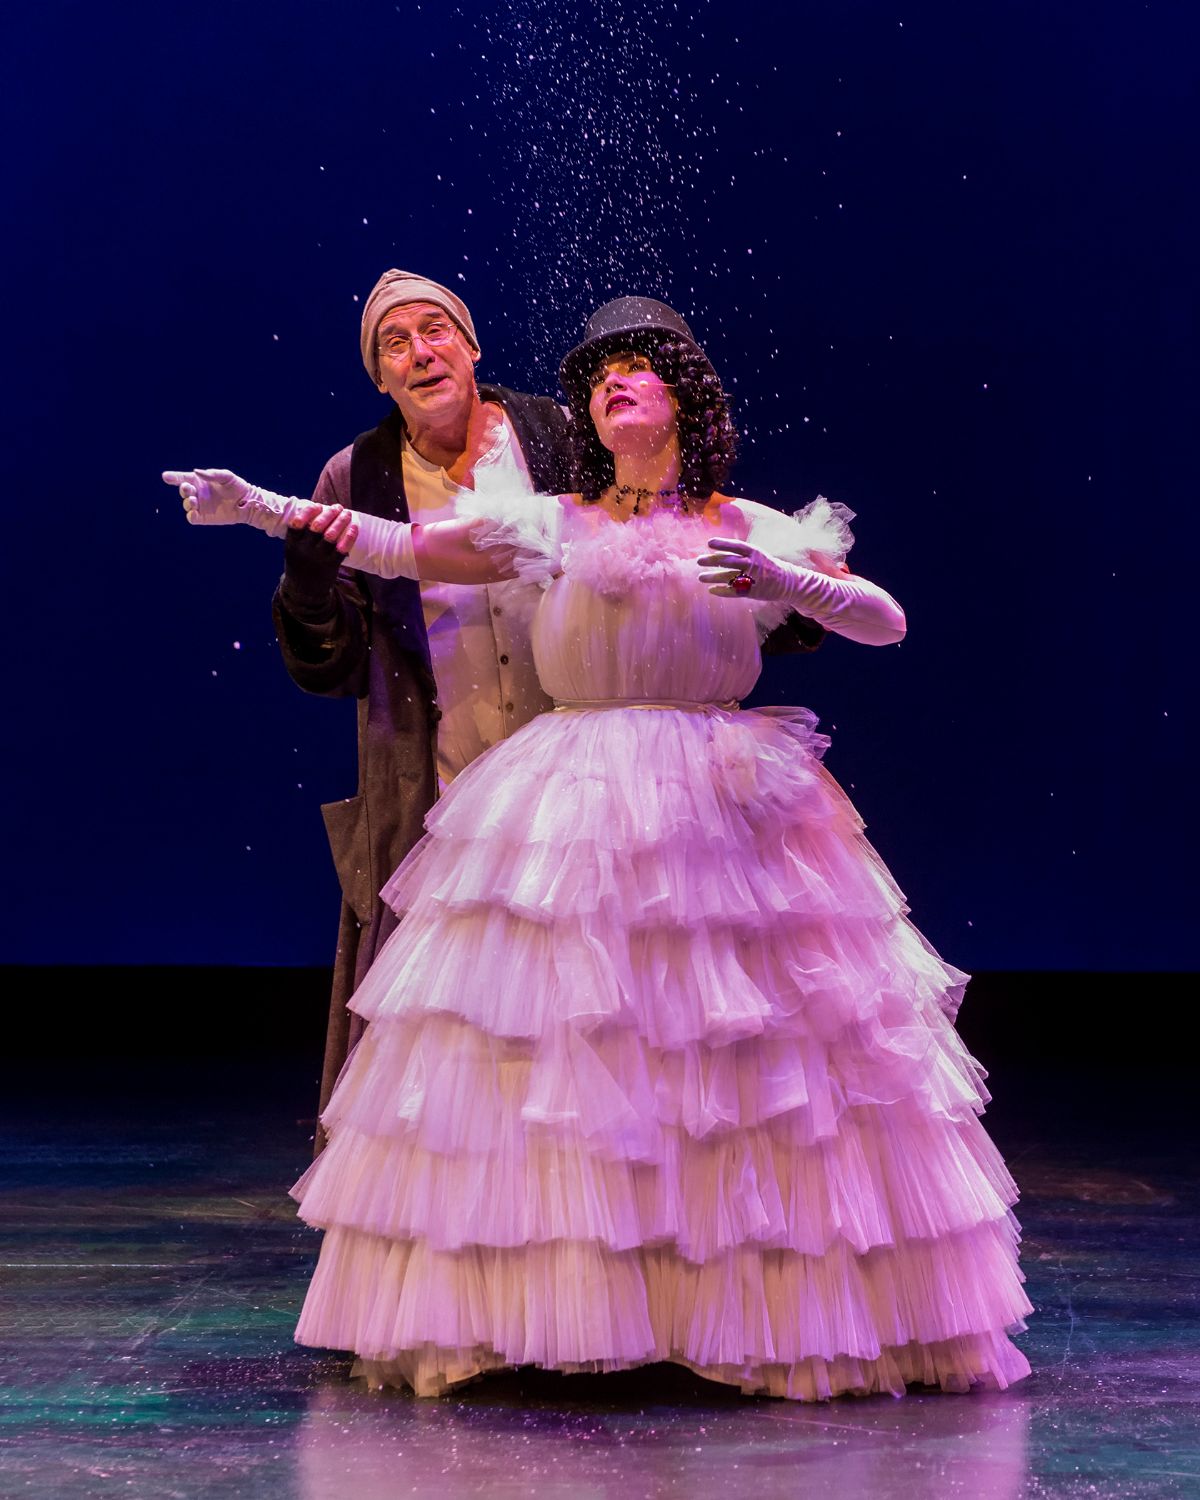 PHOTO: Craig Schwartz | The South Pasadenan | Geoff Elliott and Trisha Miller in A Christmas Carol at A Noise Within.